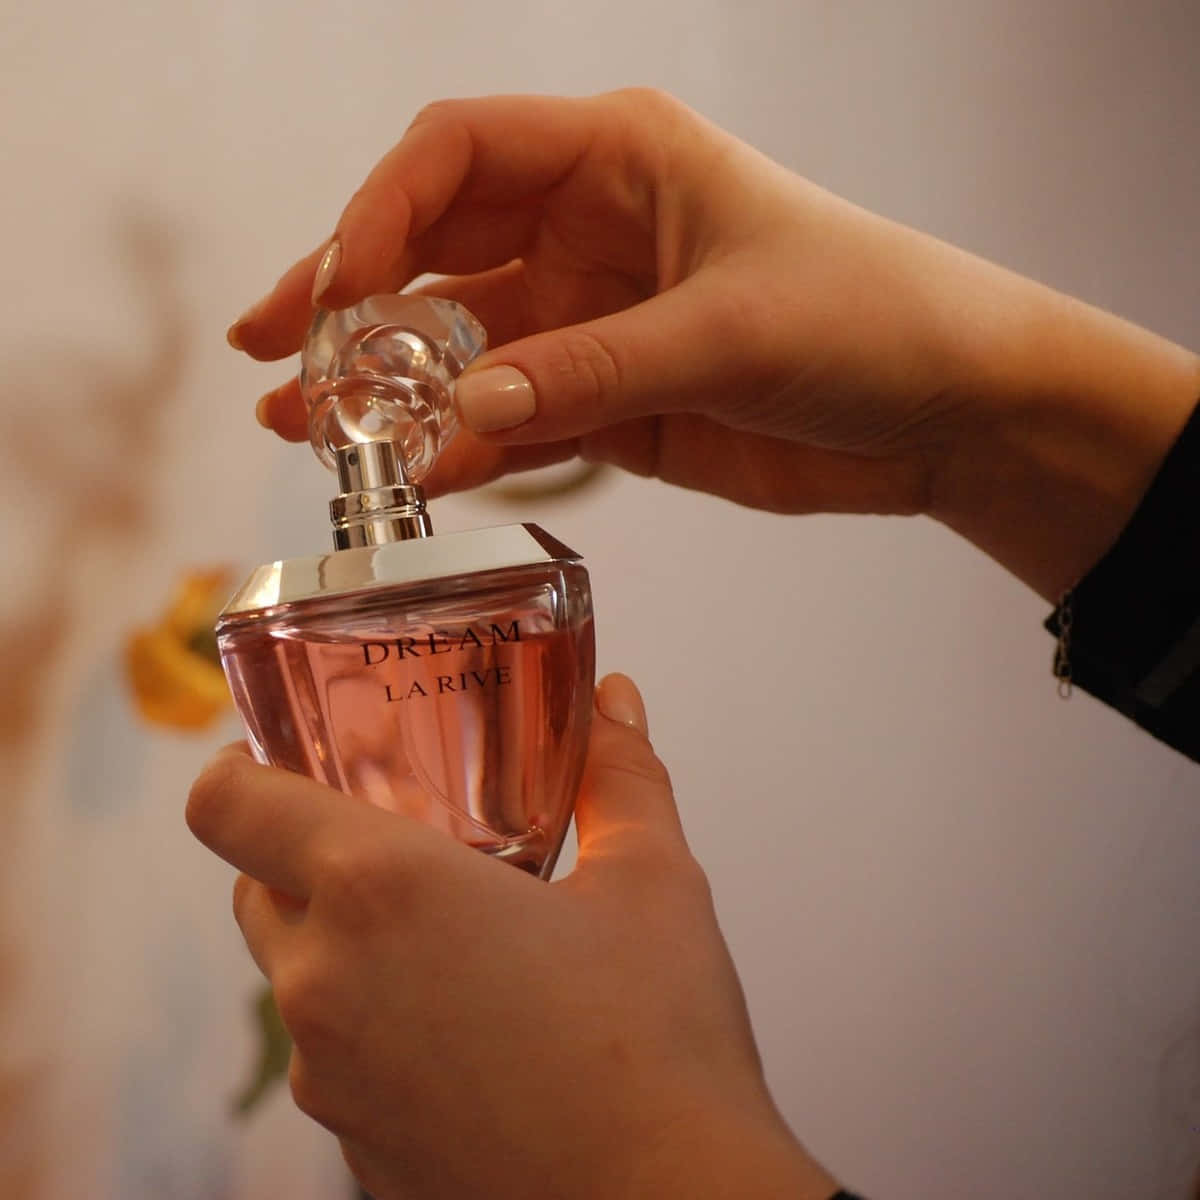 Express yourself with Perfume!